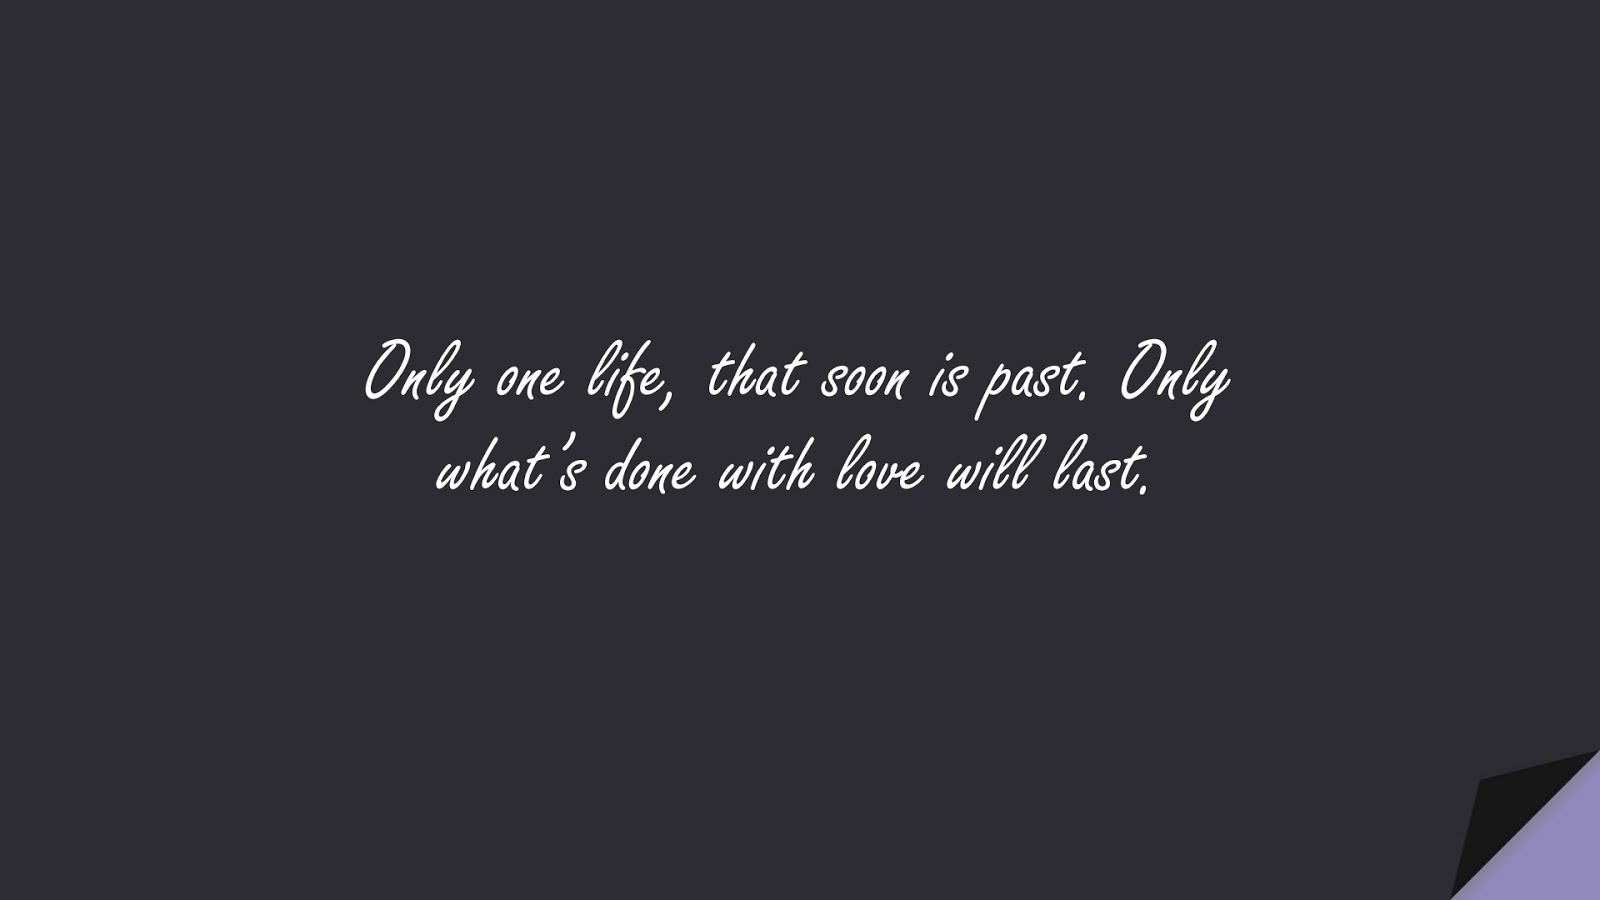 Only one life, that soon is past. Only what’s done with love will last.FALSE